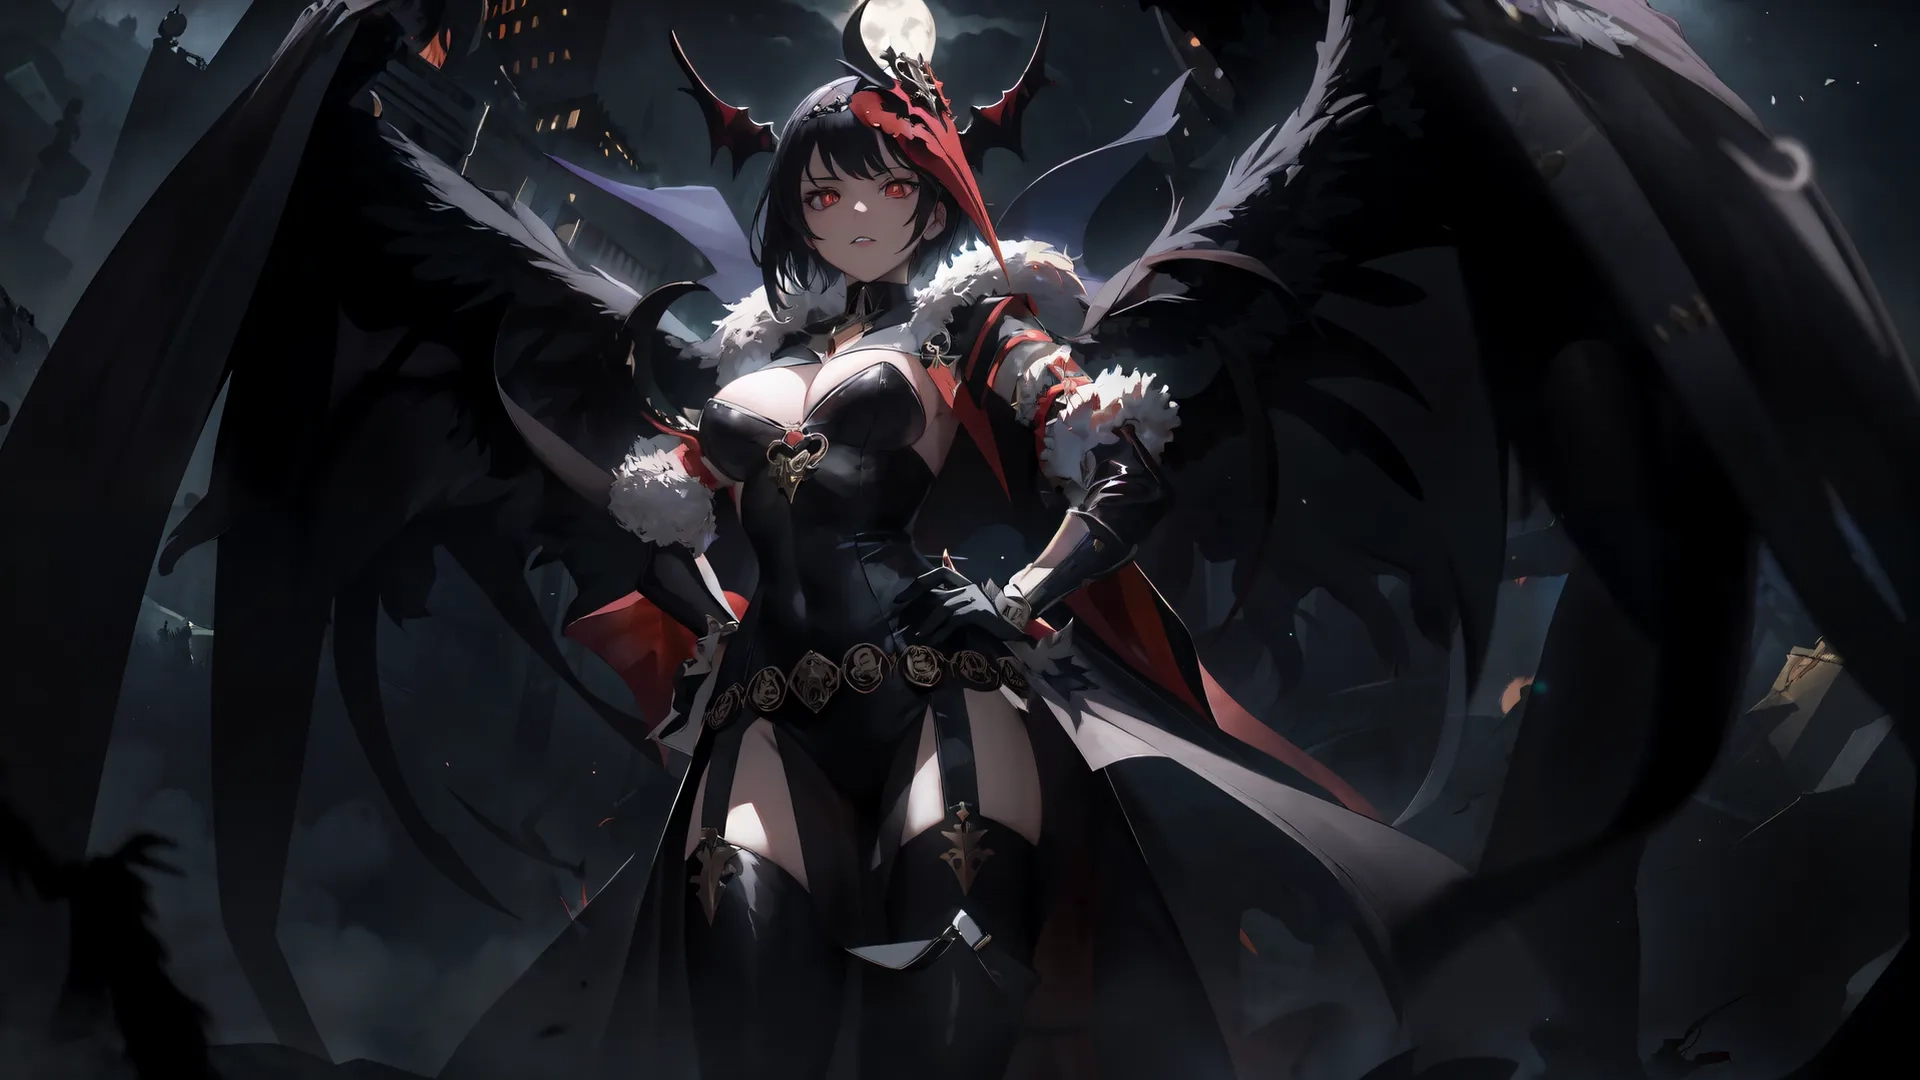 artwork of female vampire with bird, and the moon behind her image shows her back to camera her wings and dark shadows surround the scene
